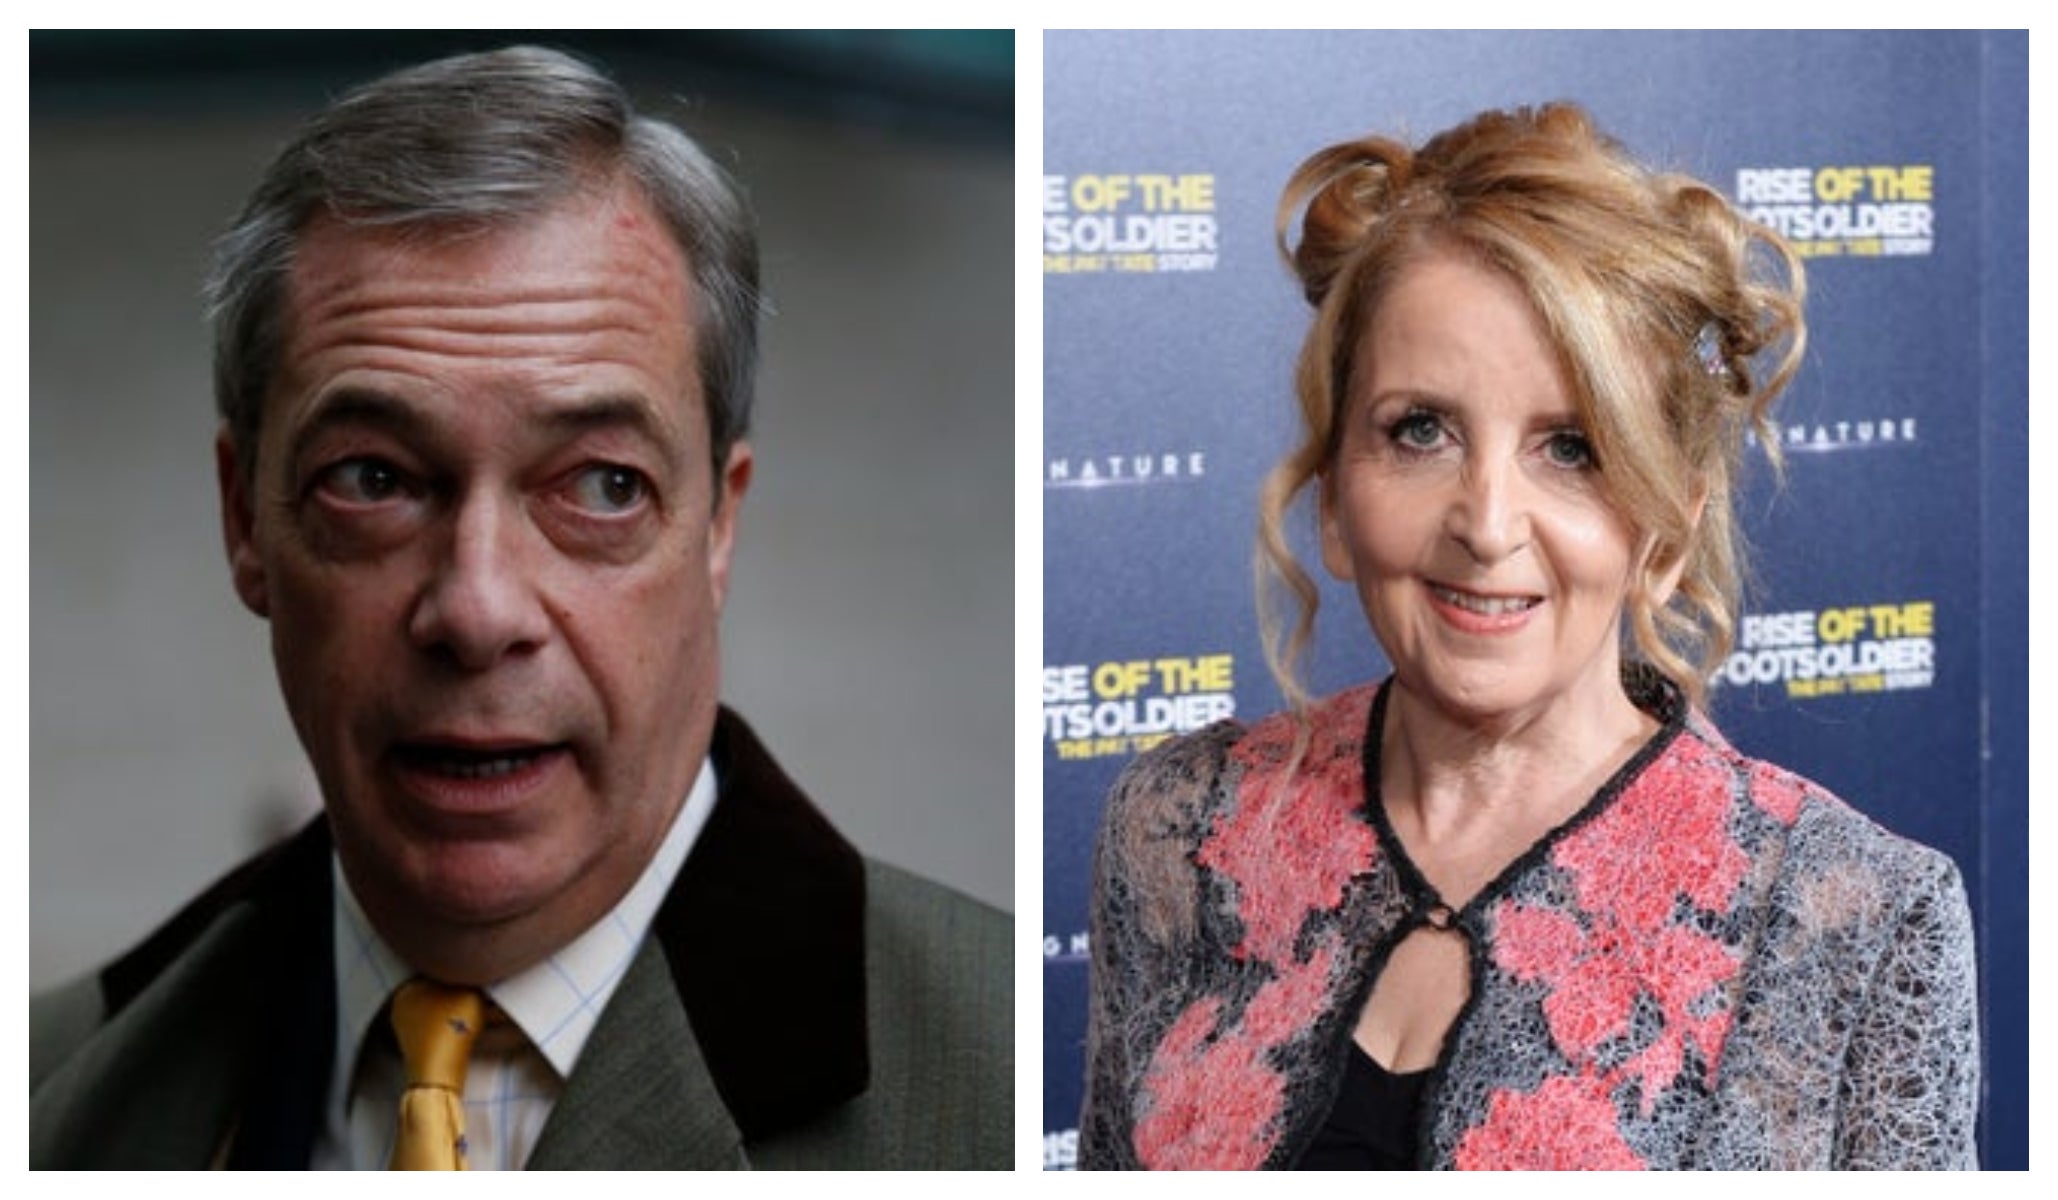 The 8 most interesting ‘celebrities’ and famous figures Nigel Farage is sharing a platform with on Thrillz